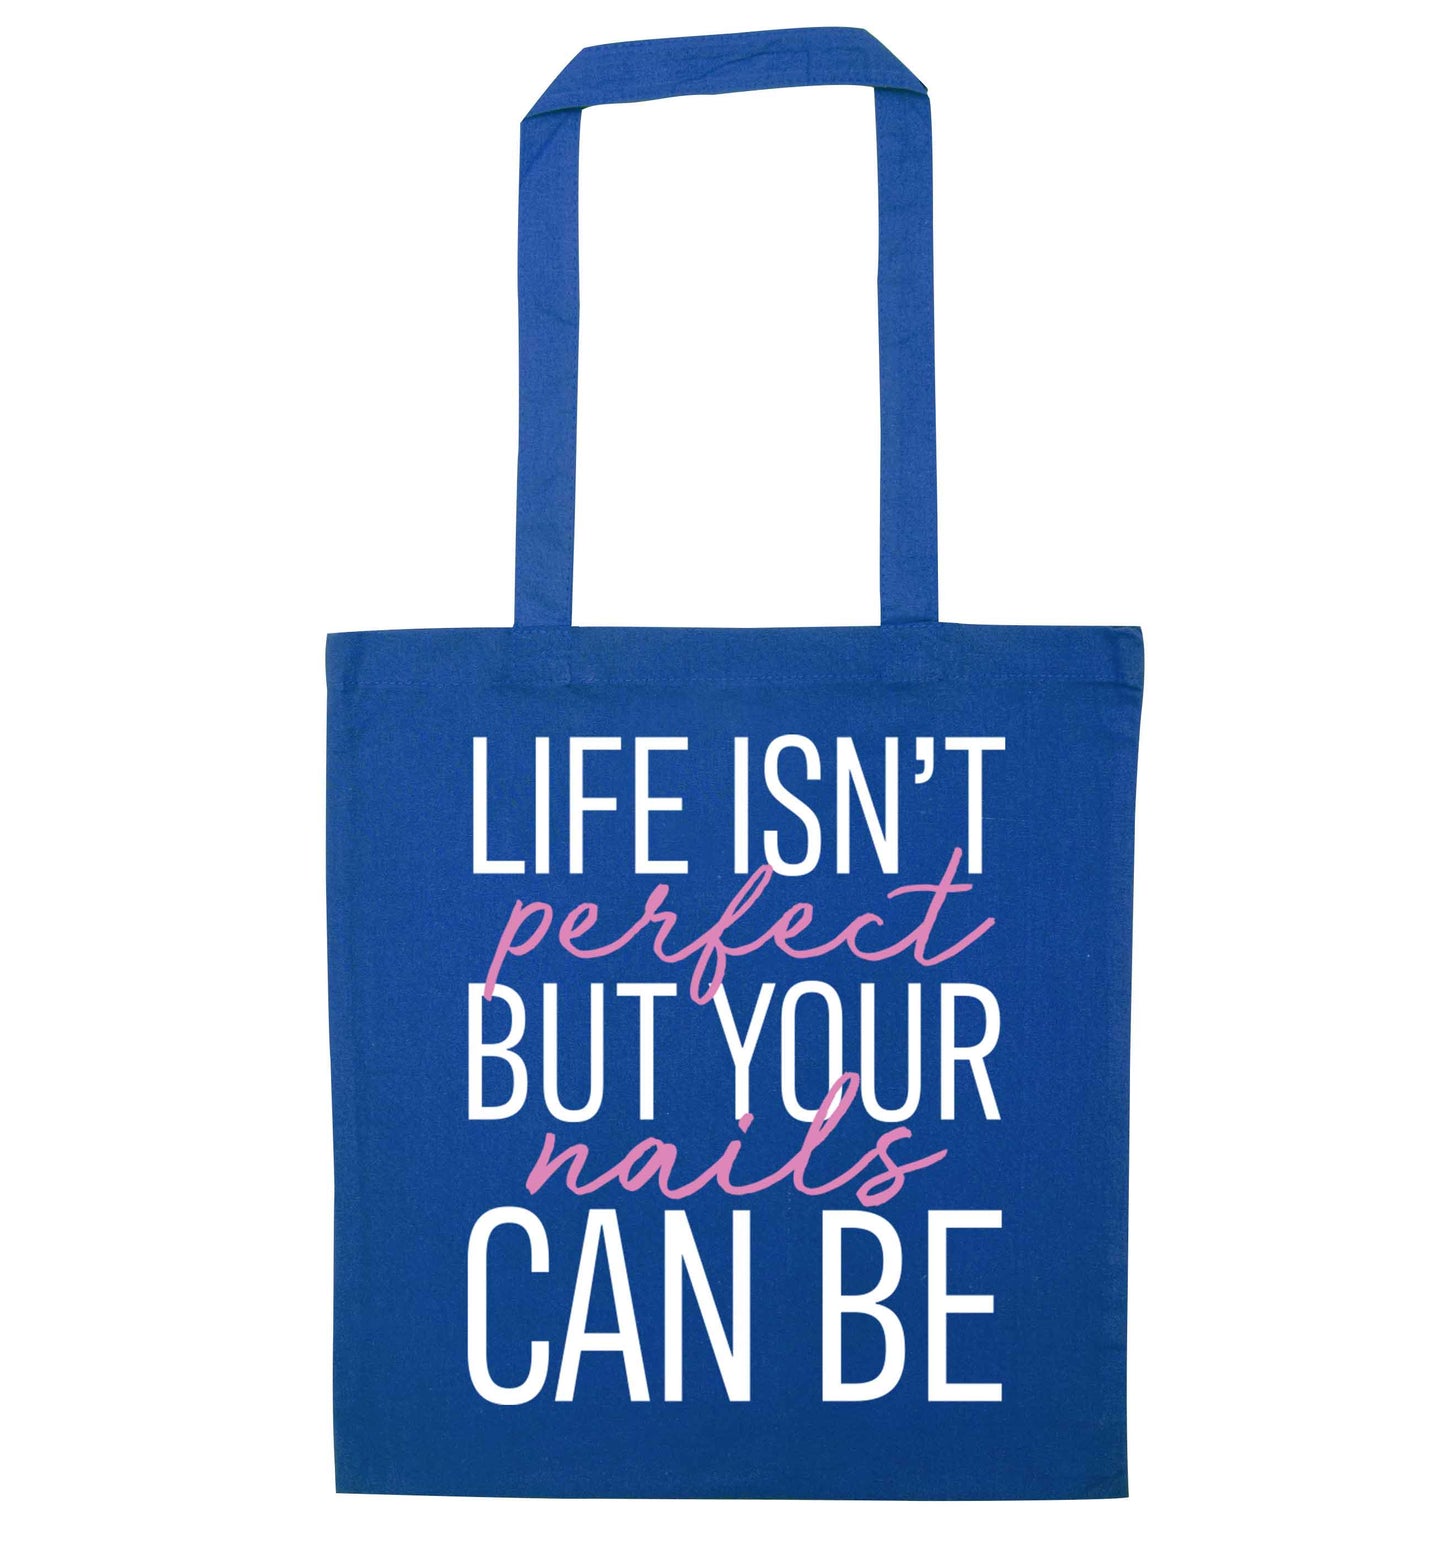 Life isn't perfect but your nails can be blue tote bag